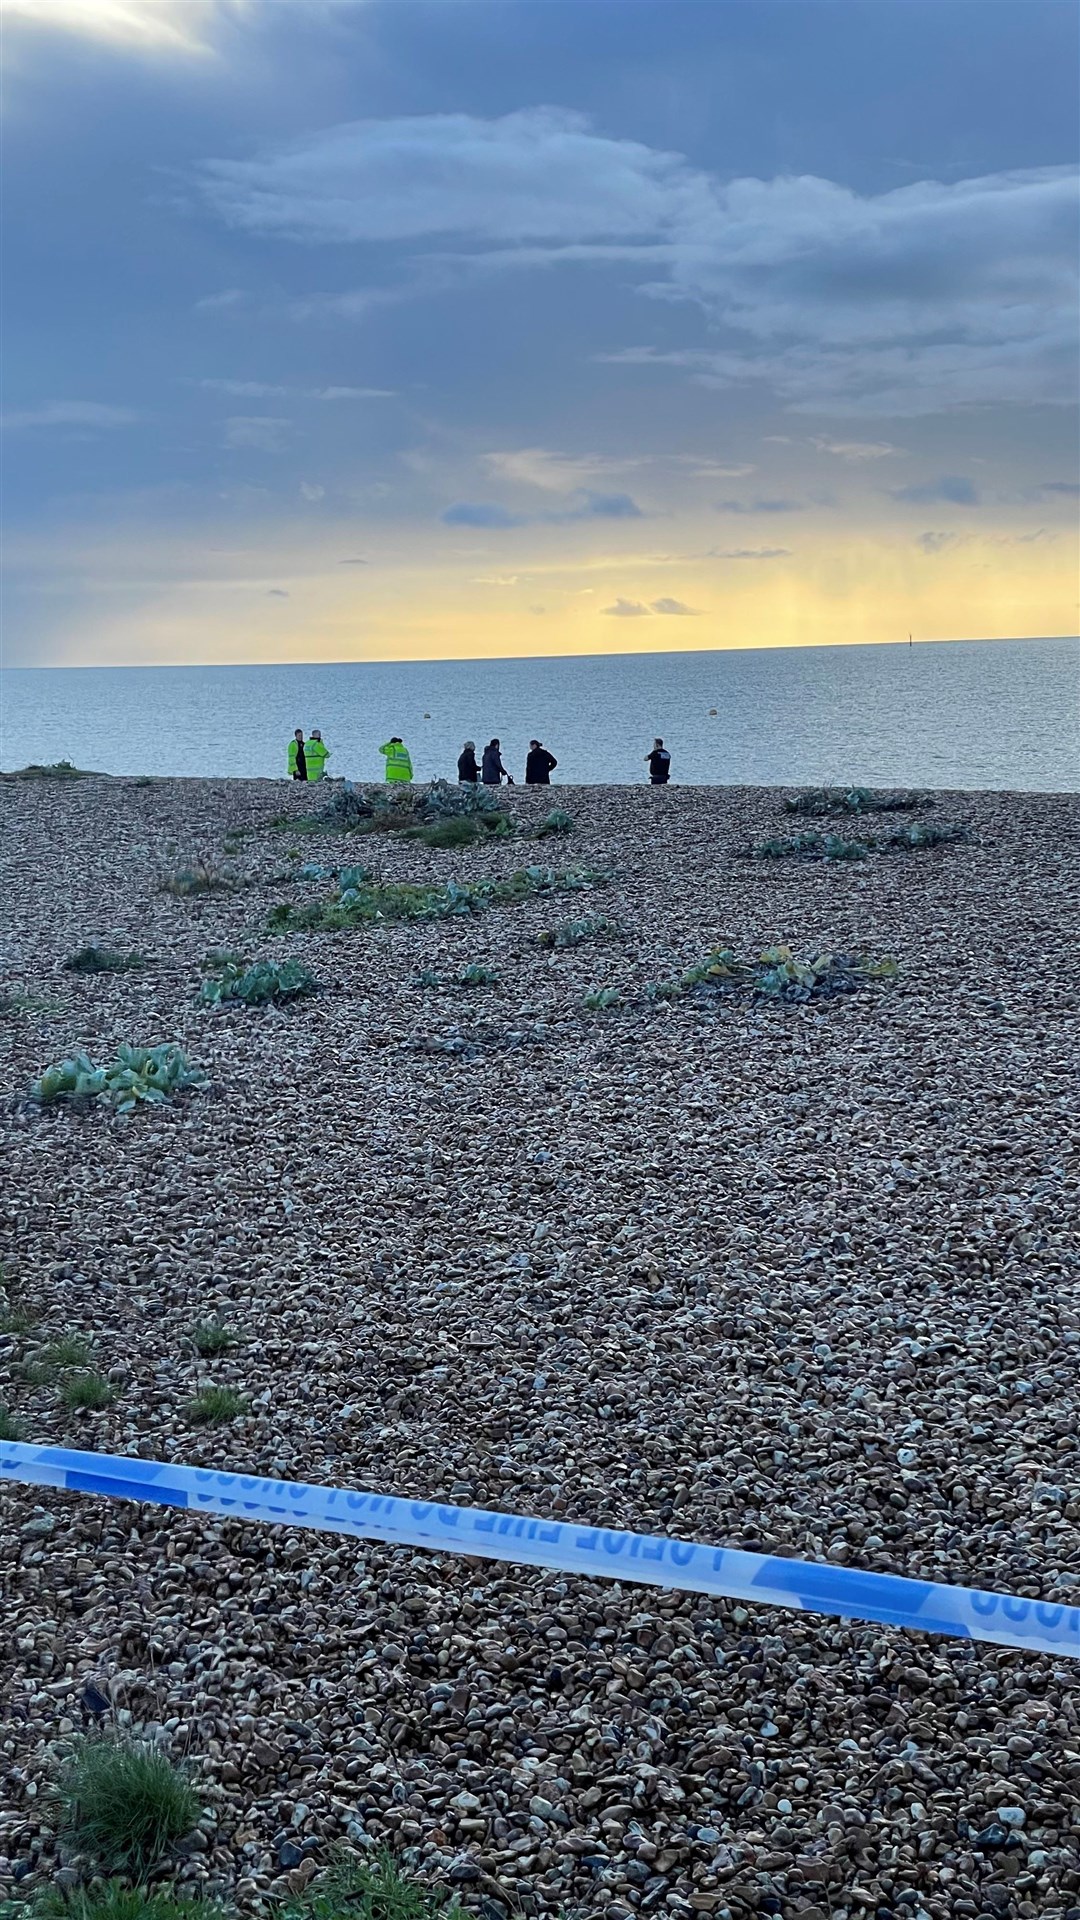 Police examine the scene after a body was found on the beach in Southsea, Hampshire (Ben Mitchell/PA)